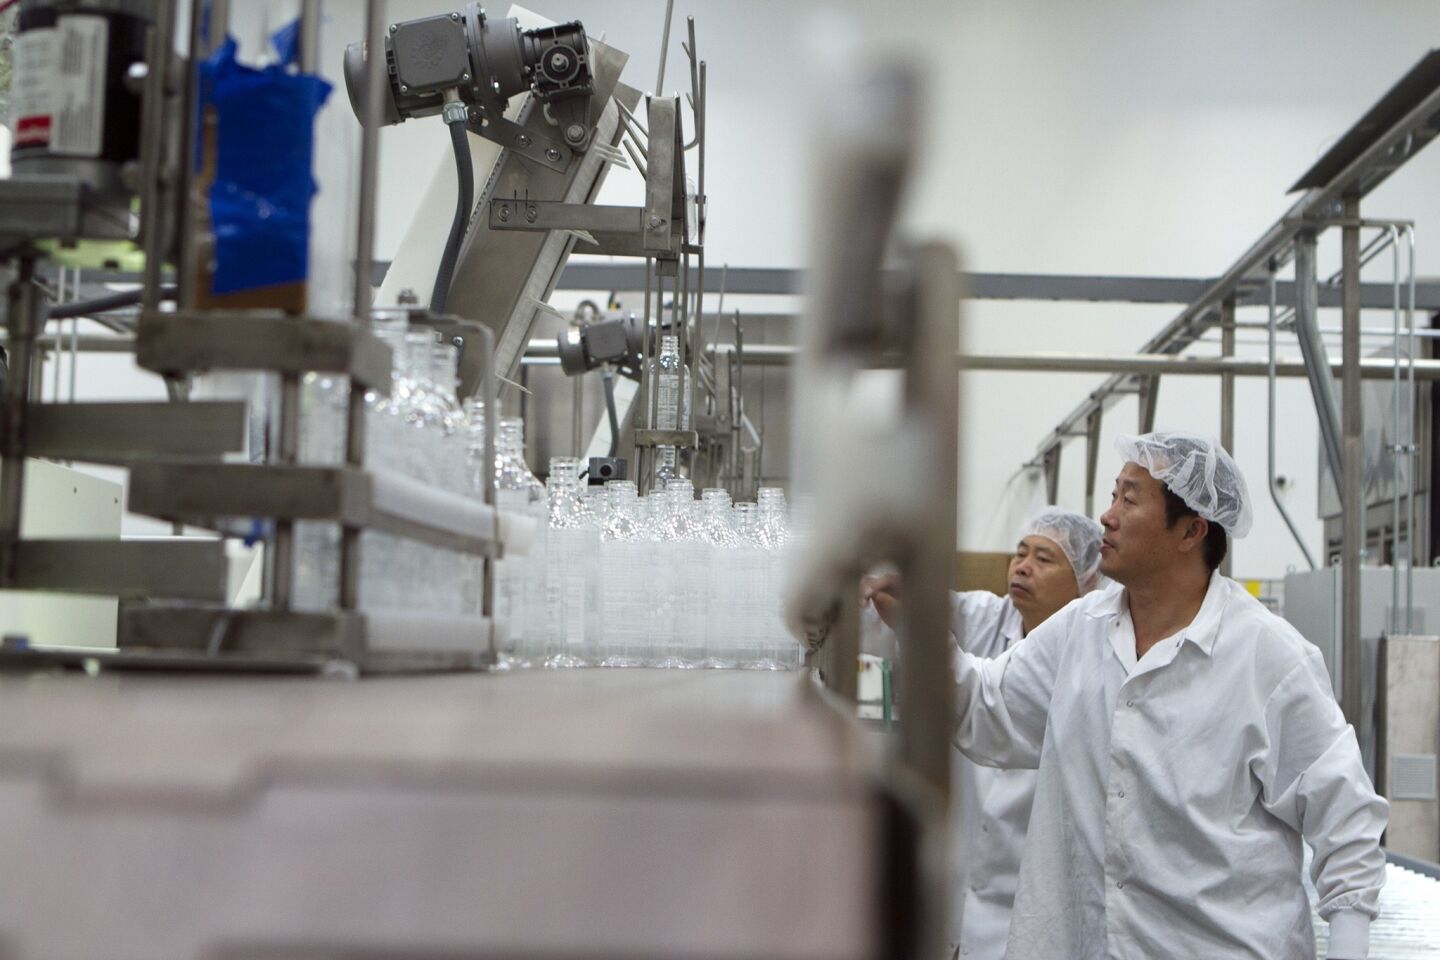 Wei Wang and Wei Zhang work in the packaging area at Huy Fong Foods Inc. in Irwindale.